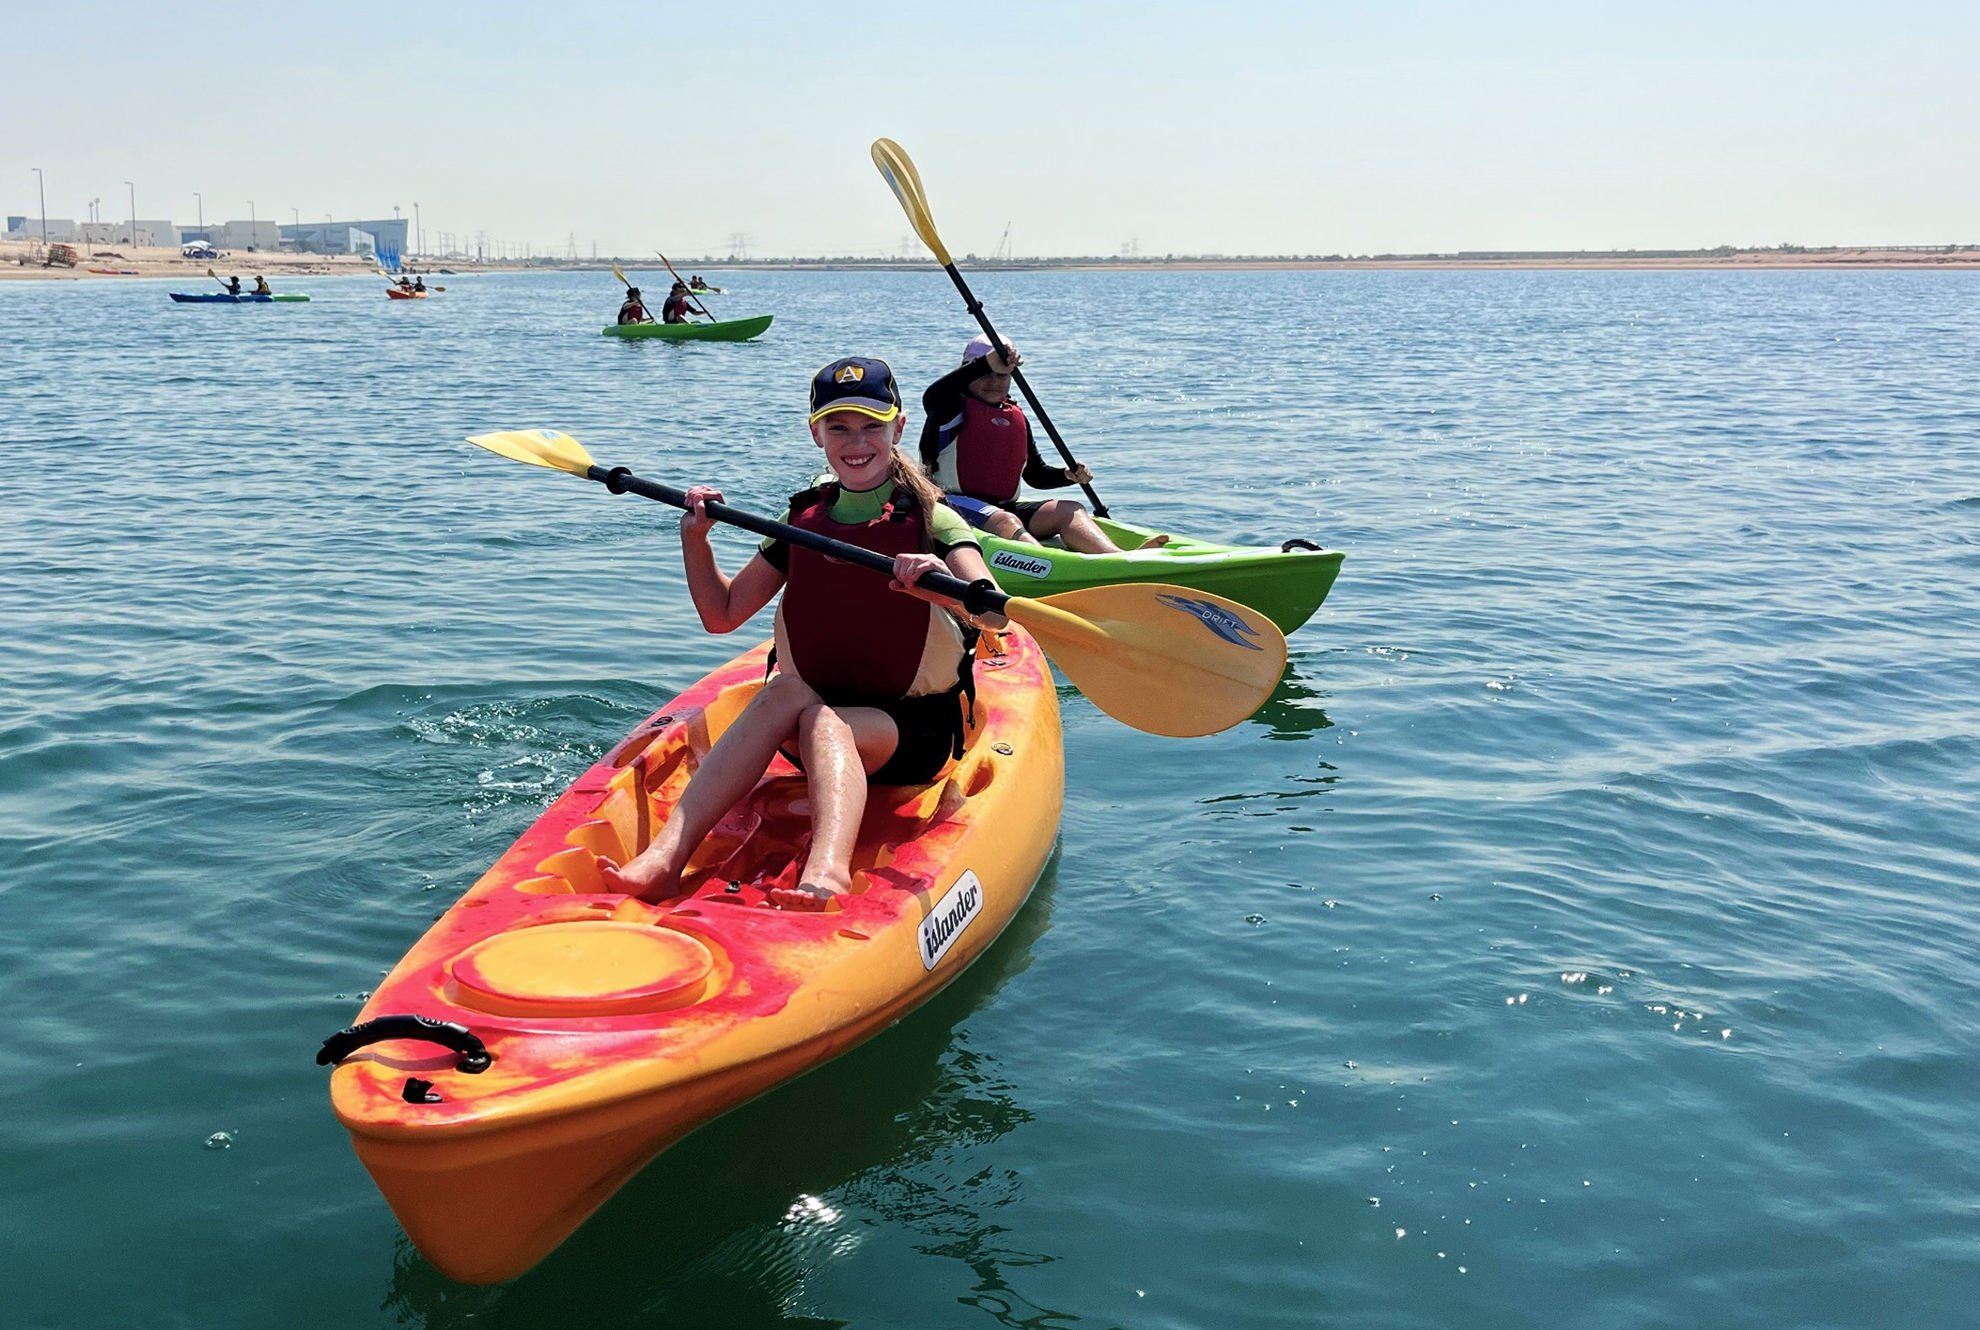 Water Sports are a powerful USP of Amity International School Abu Dhabi where there is string investment in whole child water-based activities from sailing to canoeing (pictured)